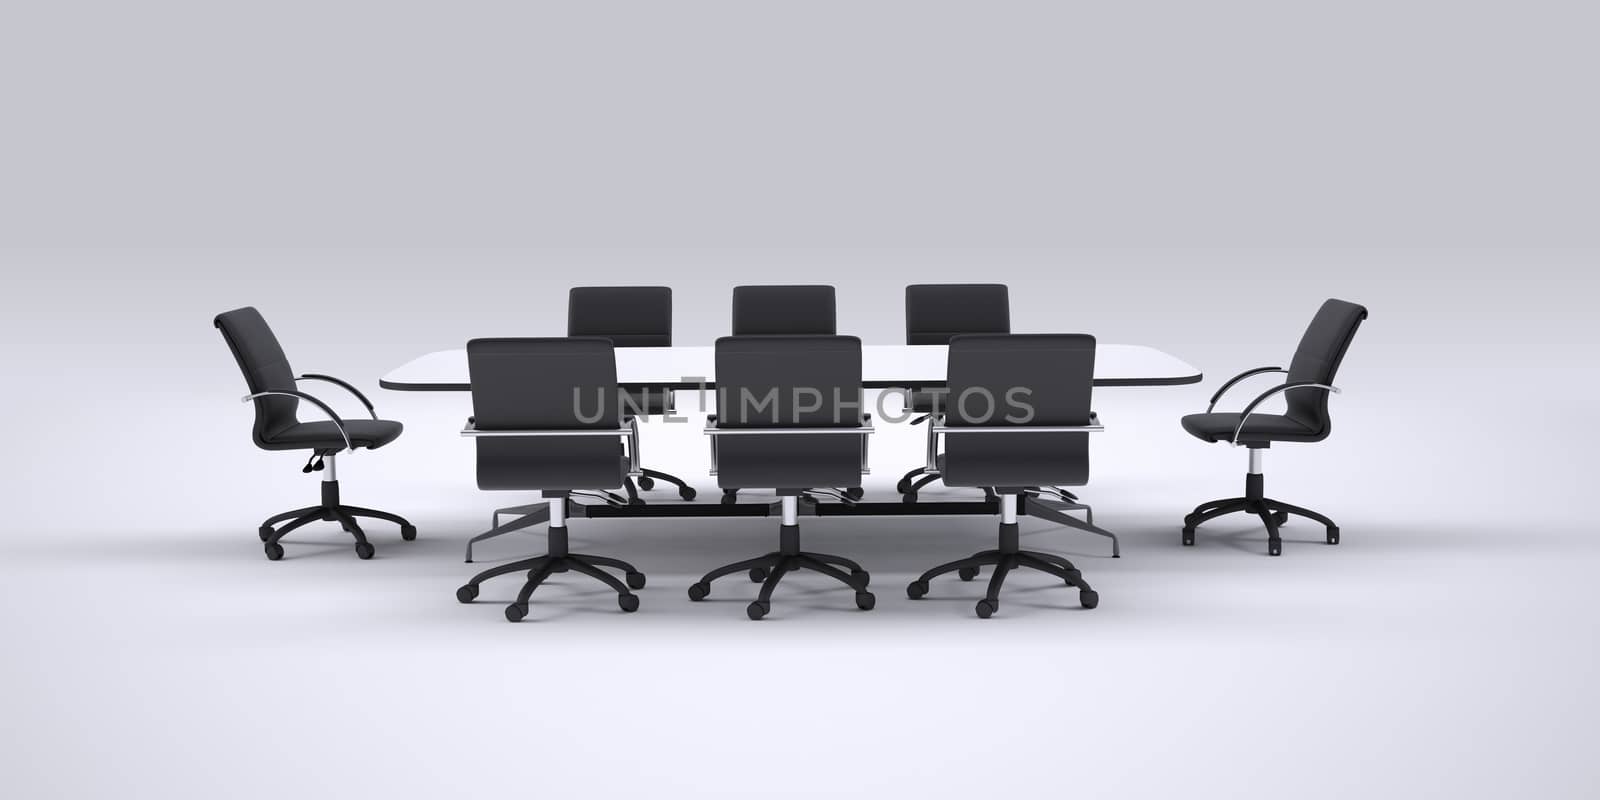 Conference table and black office chairs. Front view. Gray gradient background